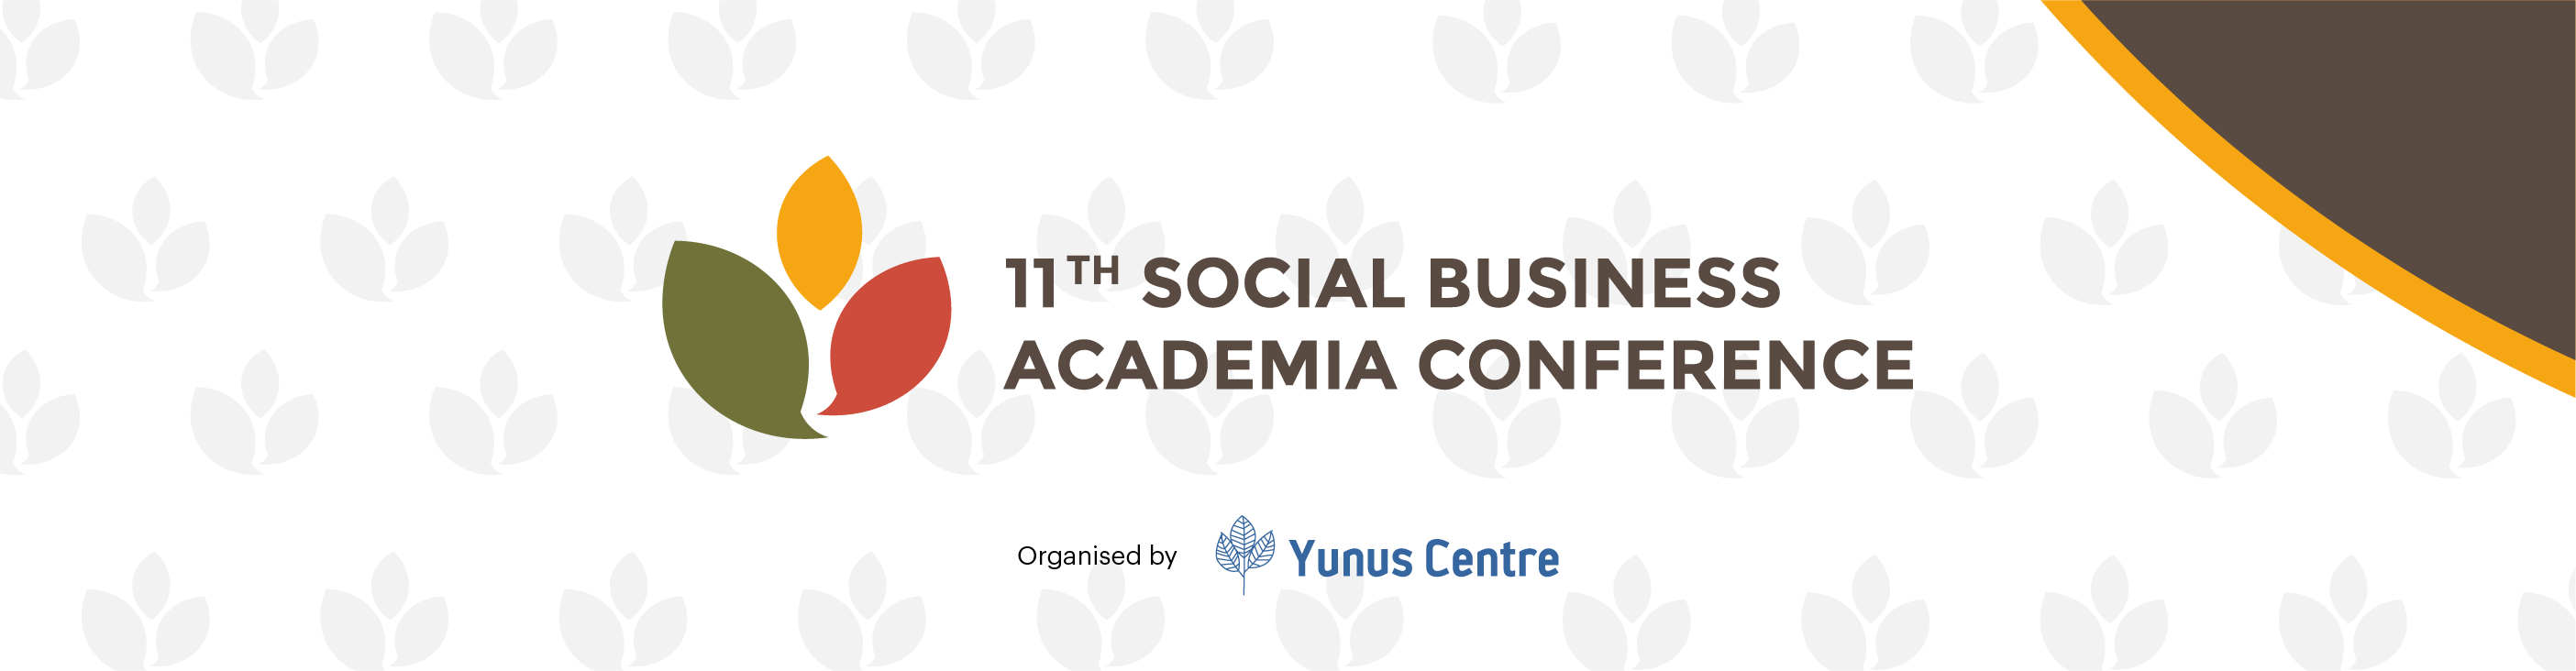 Social Business Academia Conference